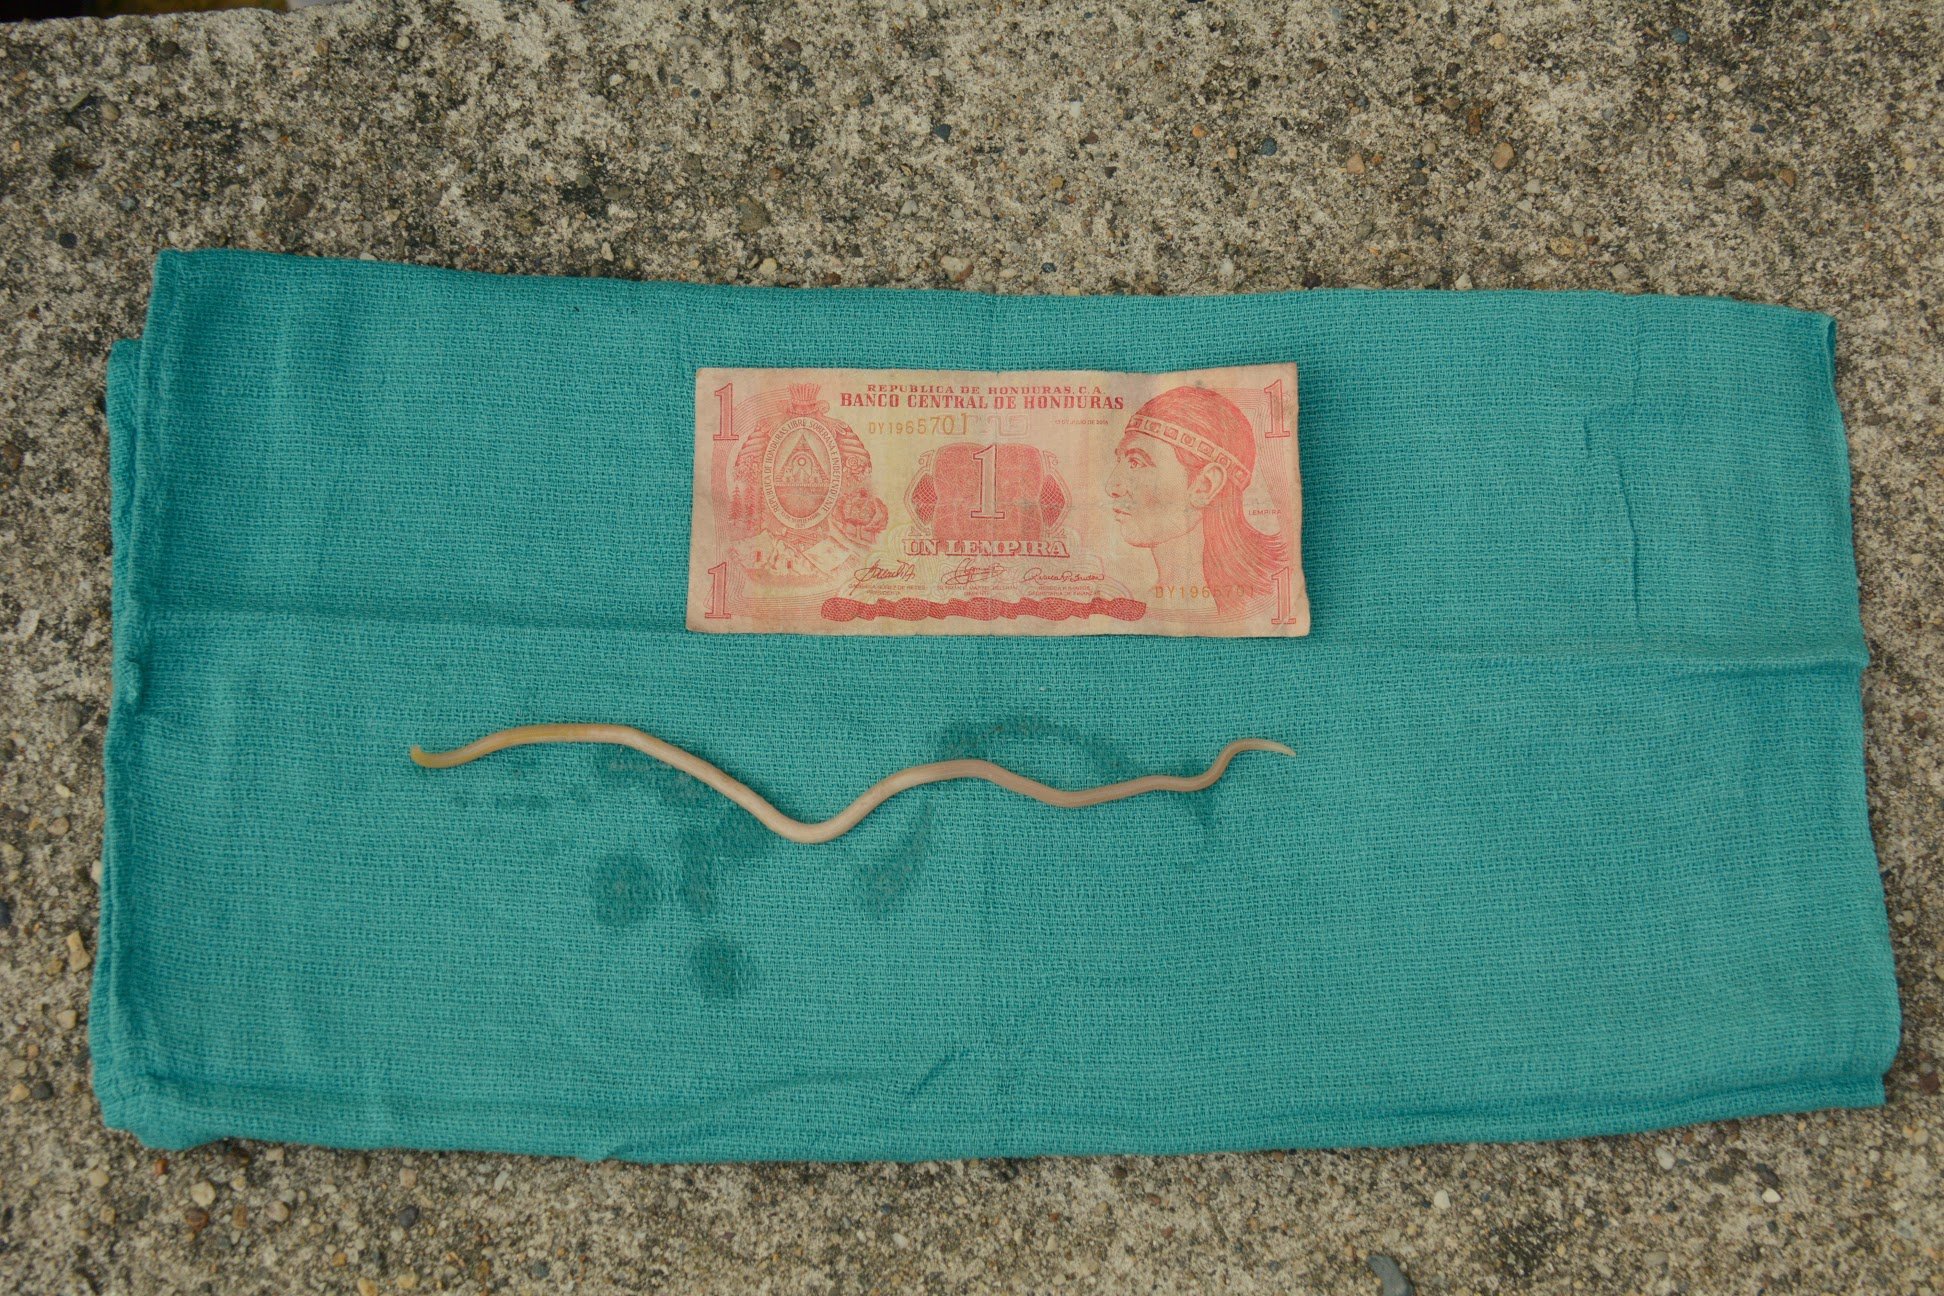 FIGURE 2. A roundworm retrieved from the emesis of a female with a SBO secondary to ascariasis infection appears next to a Honduran lempira, roughly the same size as a dollar bill.